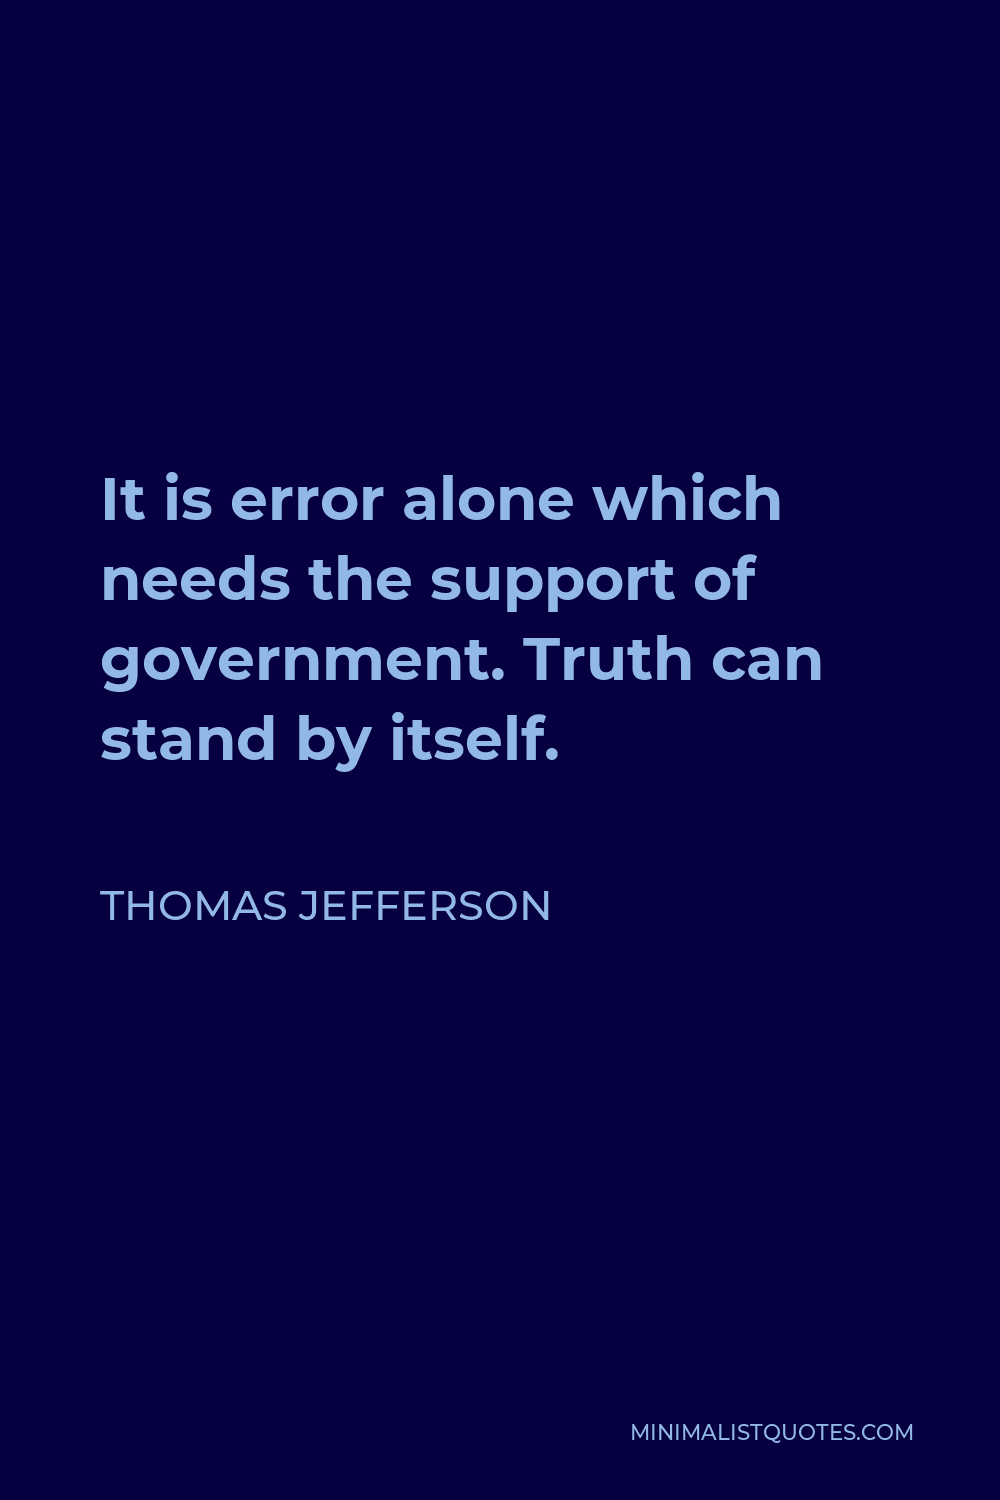 Thomas Jefferson Quote - It is error alone which needs the support of government. Truth can stand by itself.